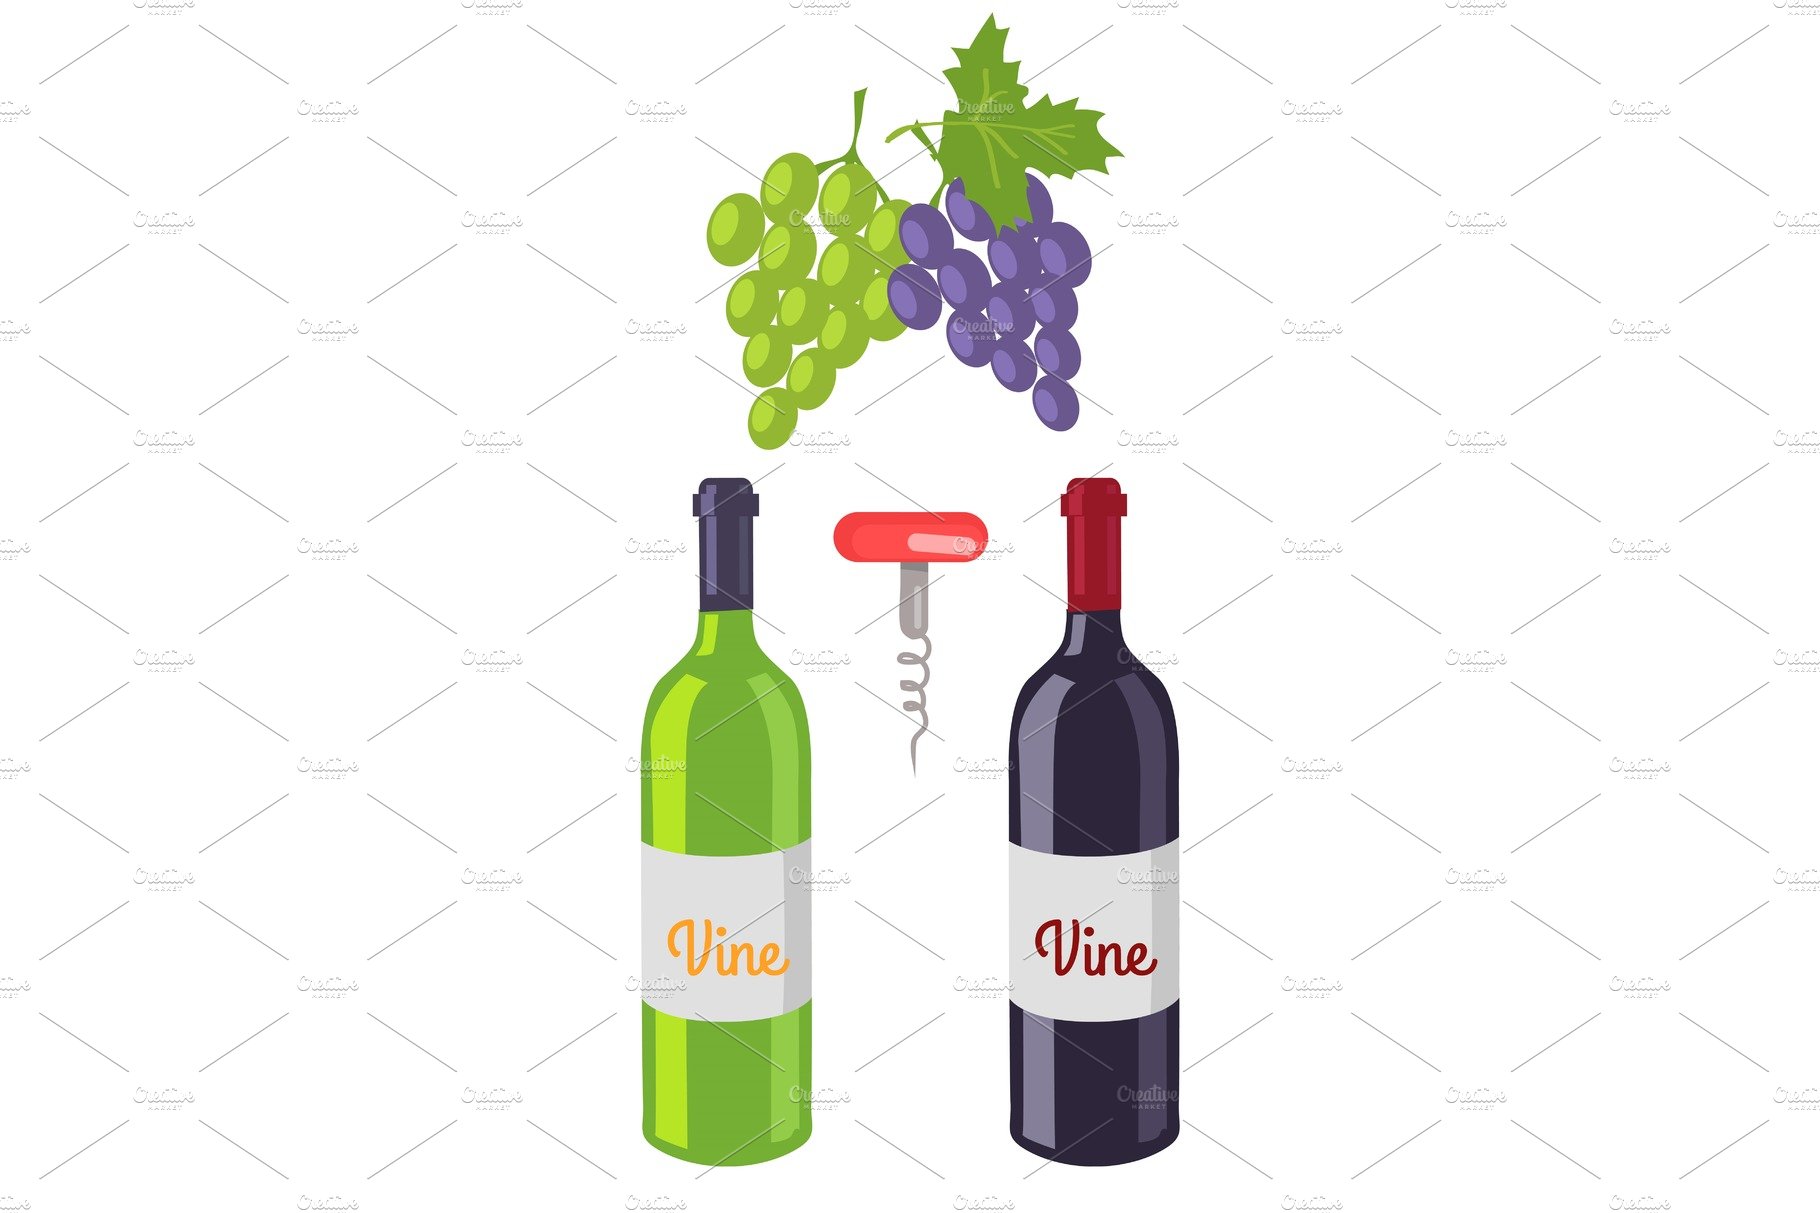 Wine Bottles and Grapes Set Vector cover image.